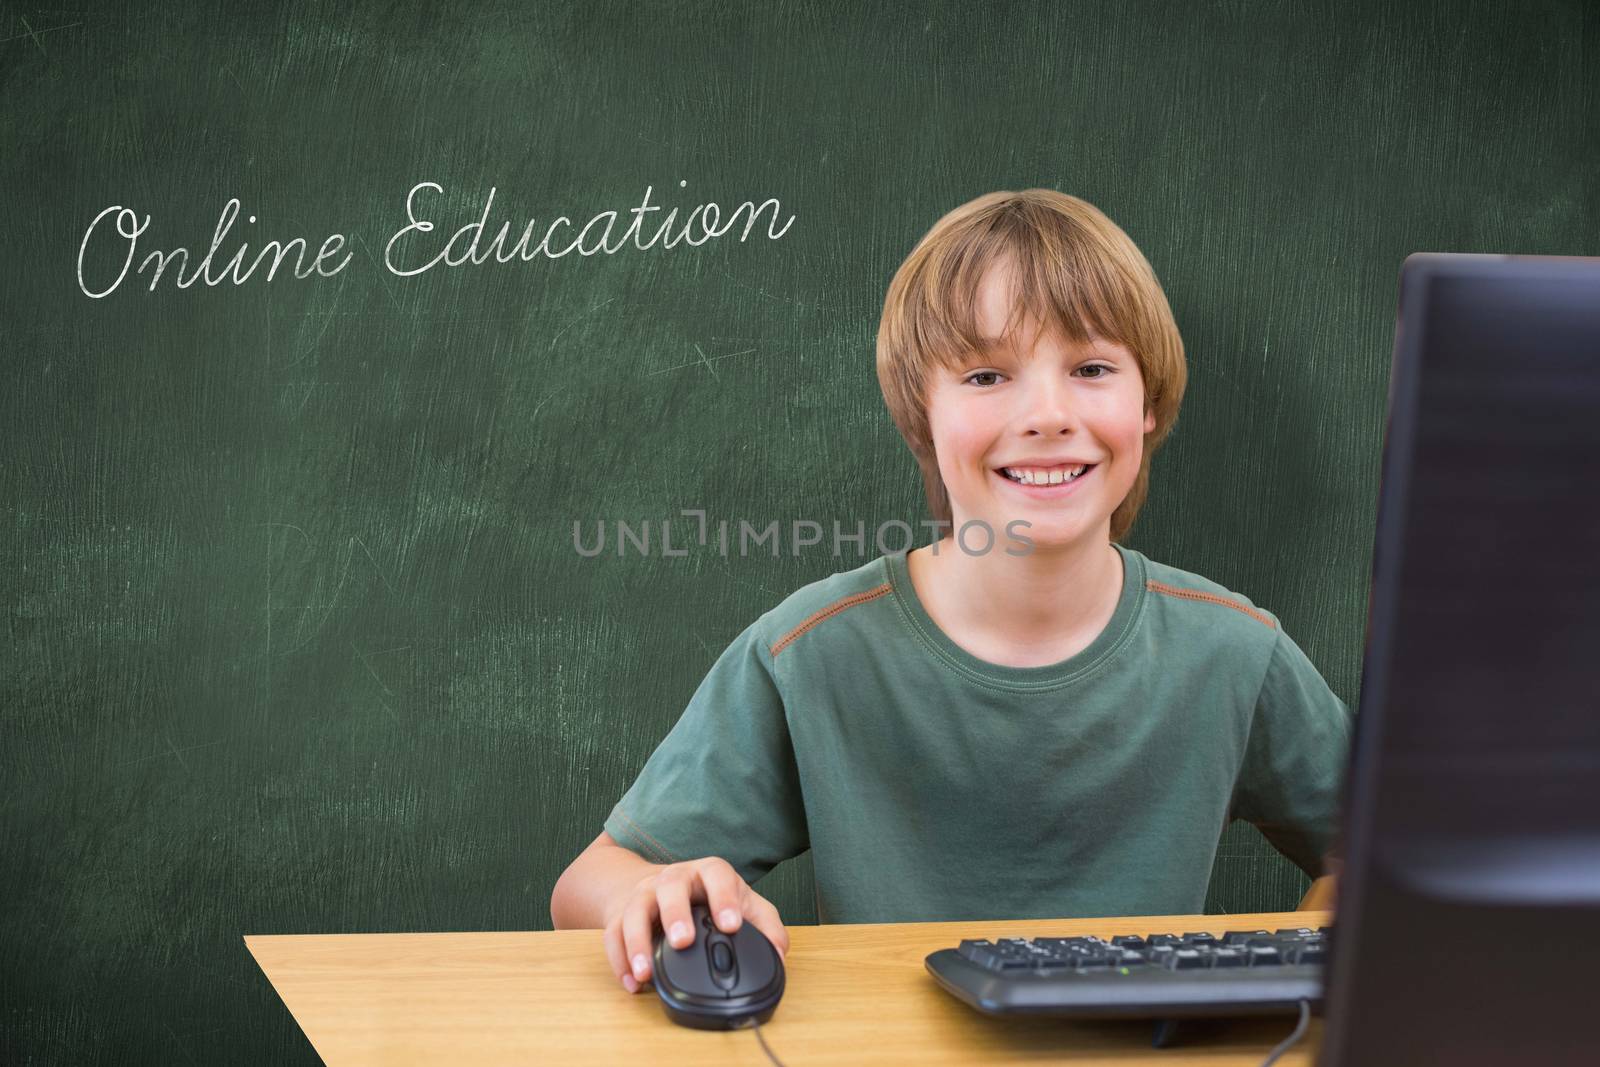 The word online education and school kid on computer against green chalkboard